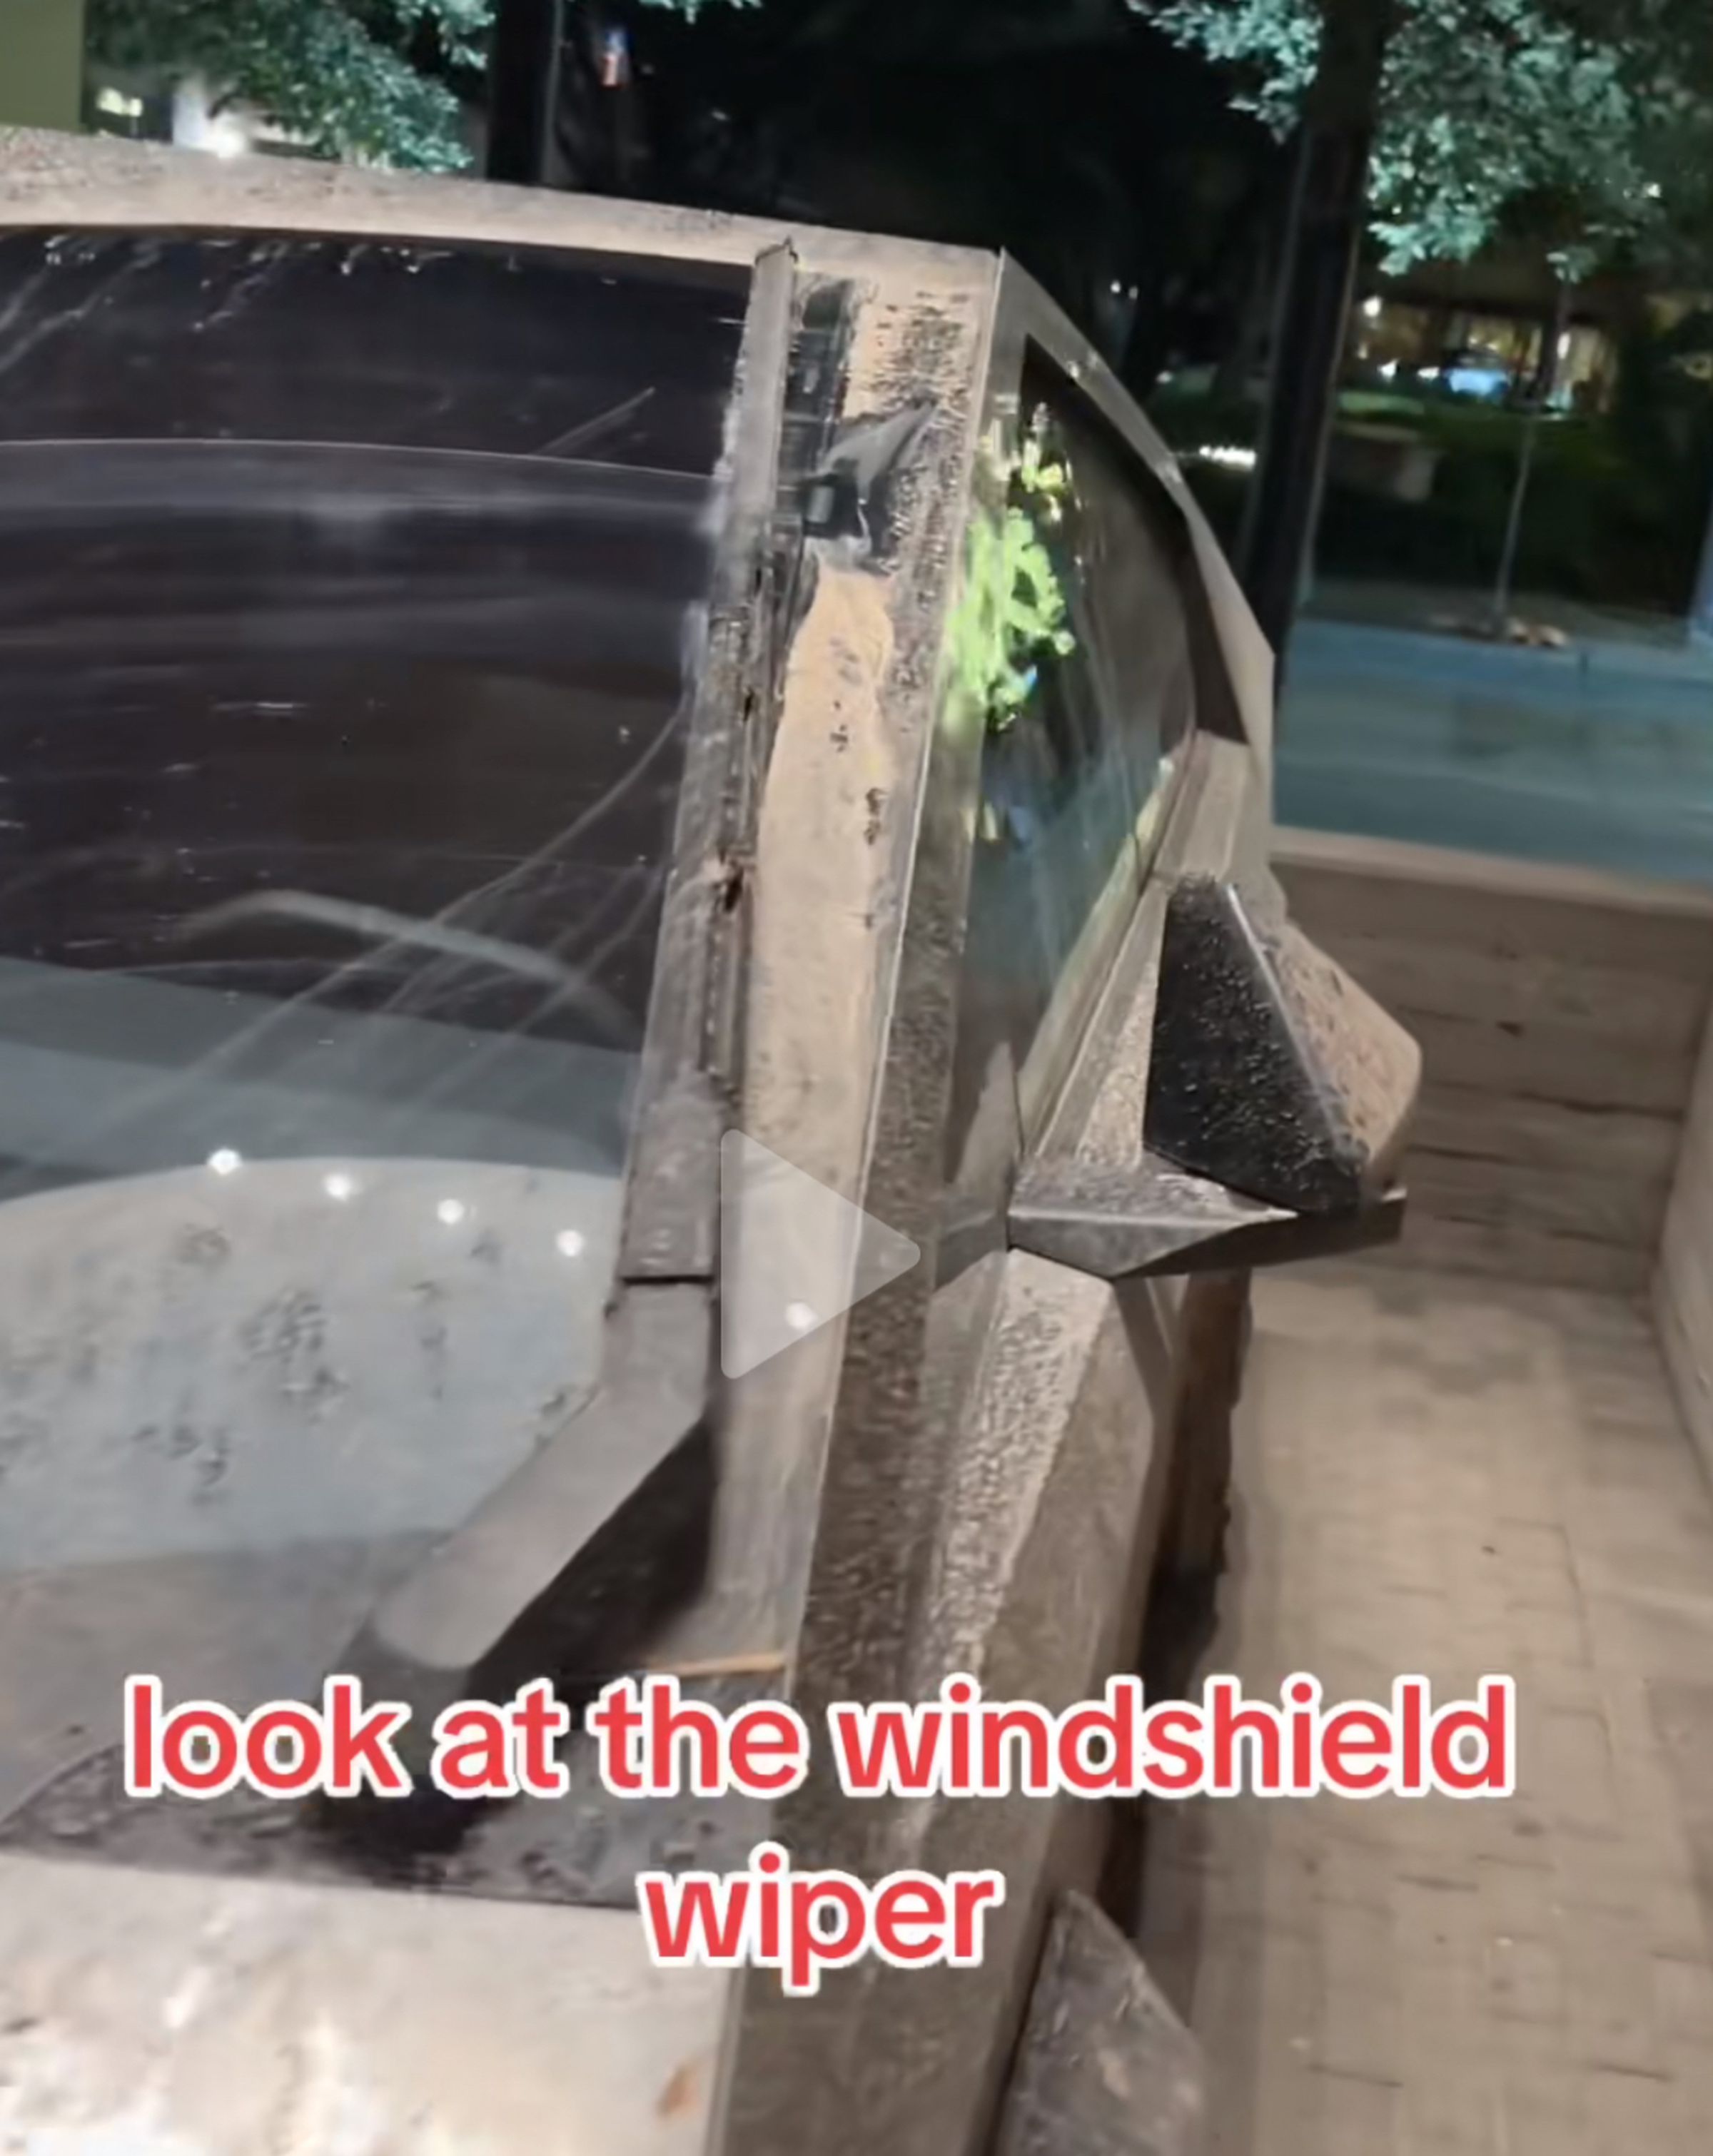 Close up photos of the Tesla Cybertruck windshield wiper on a very muddy truck, showing a line of mud on the windshield that may be evidence of the wiper being two wiper blades.